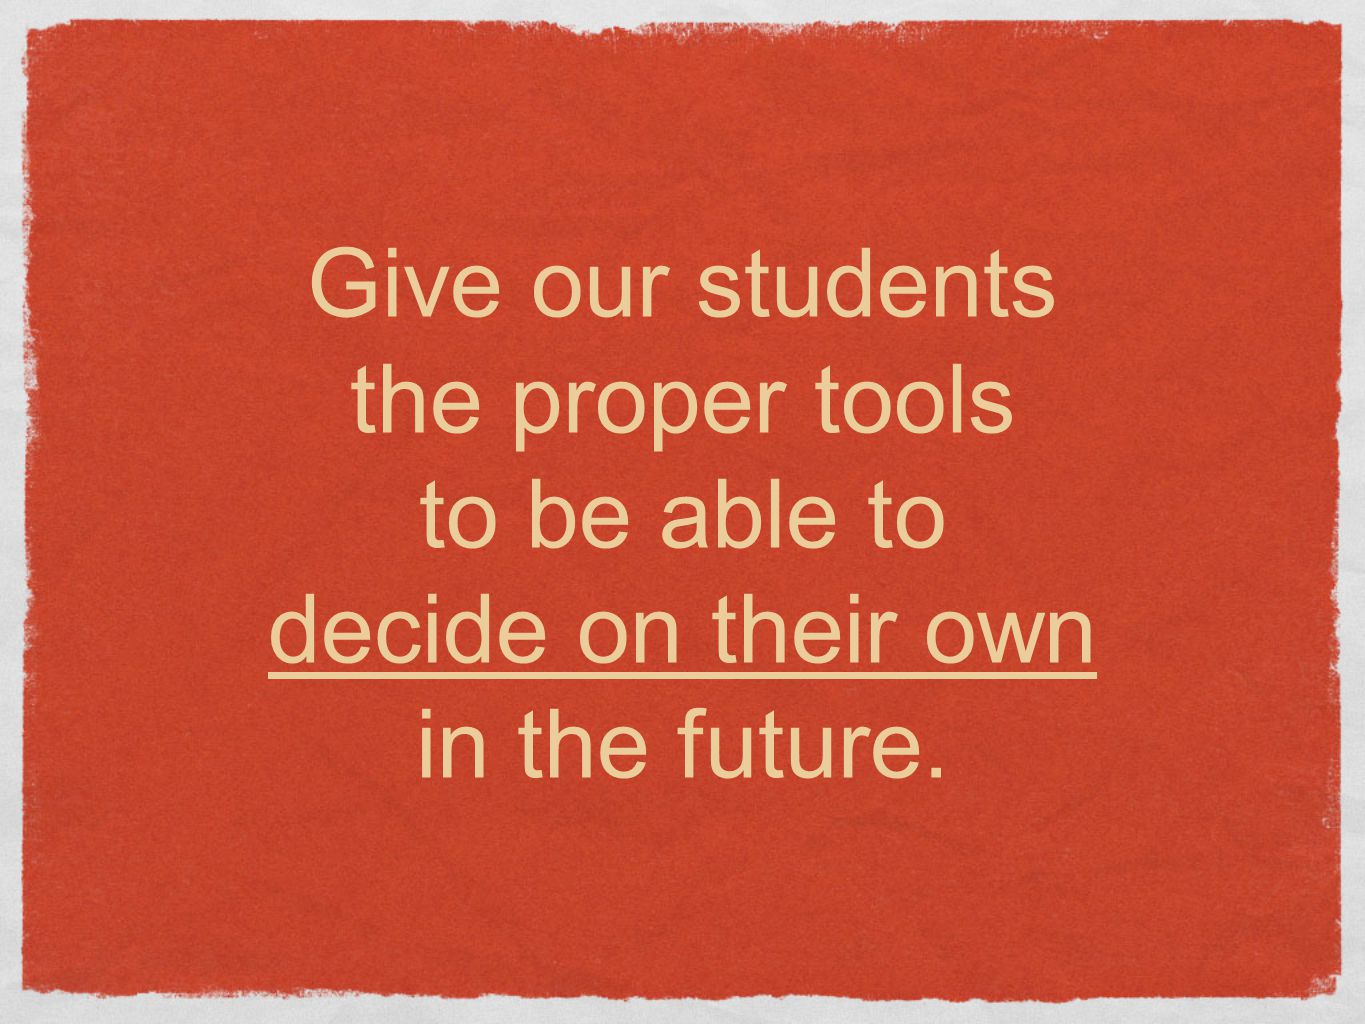 Give our students the proper tools to be able to decide on their own in the future.